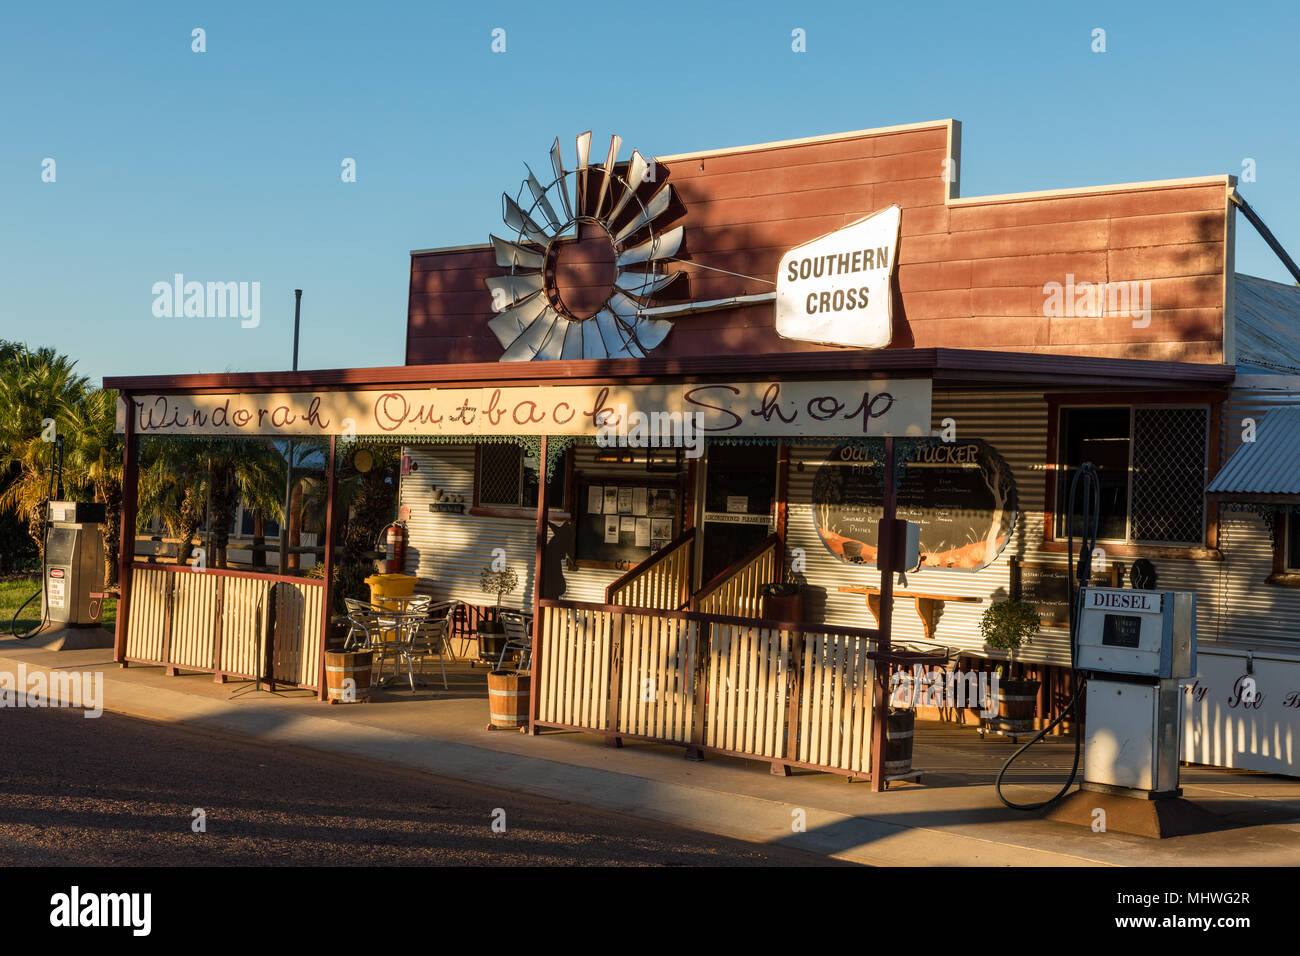 Windorah, Queensland, Australia. Picturesque shop, cafe and fuel outlet in Windorah in the outback of western central Queensland. Stock Photo